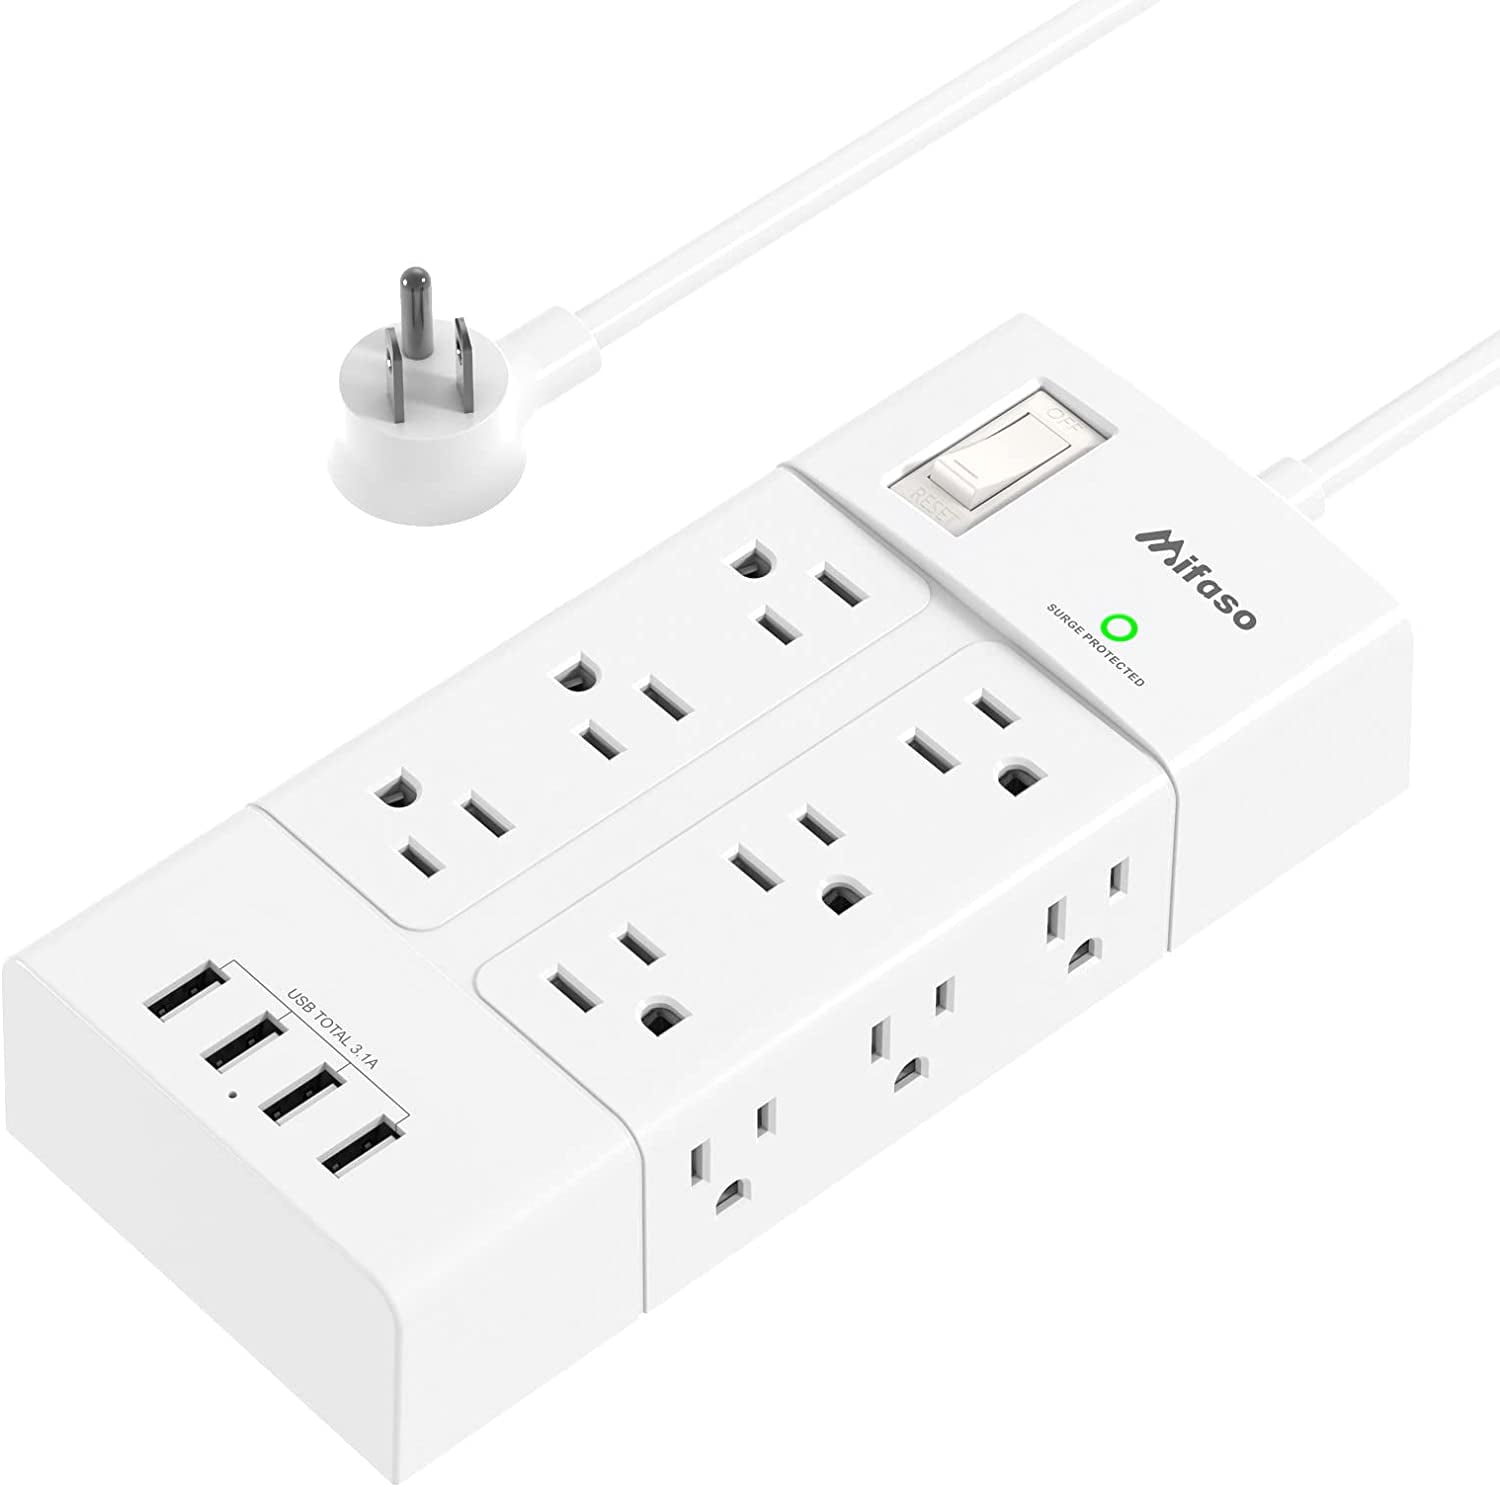 Multi Outlets Flat Plug Surge Protector Power Strip with 3 USB Charging Ports 